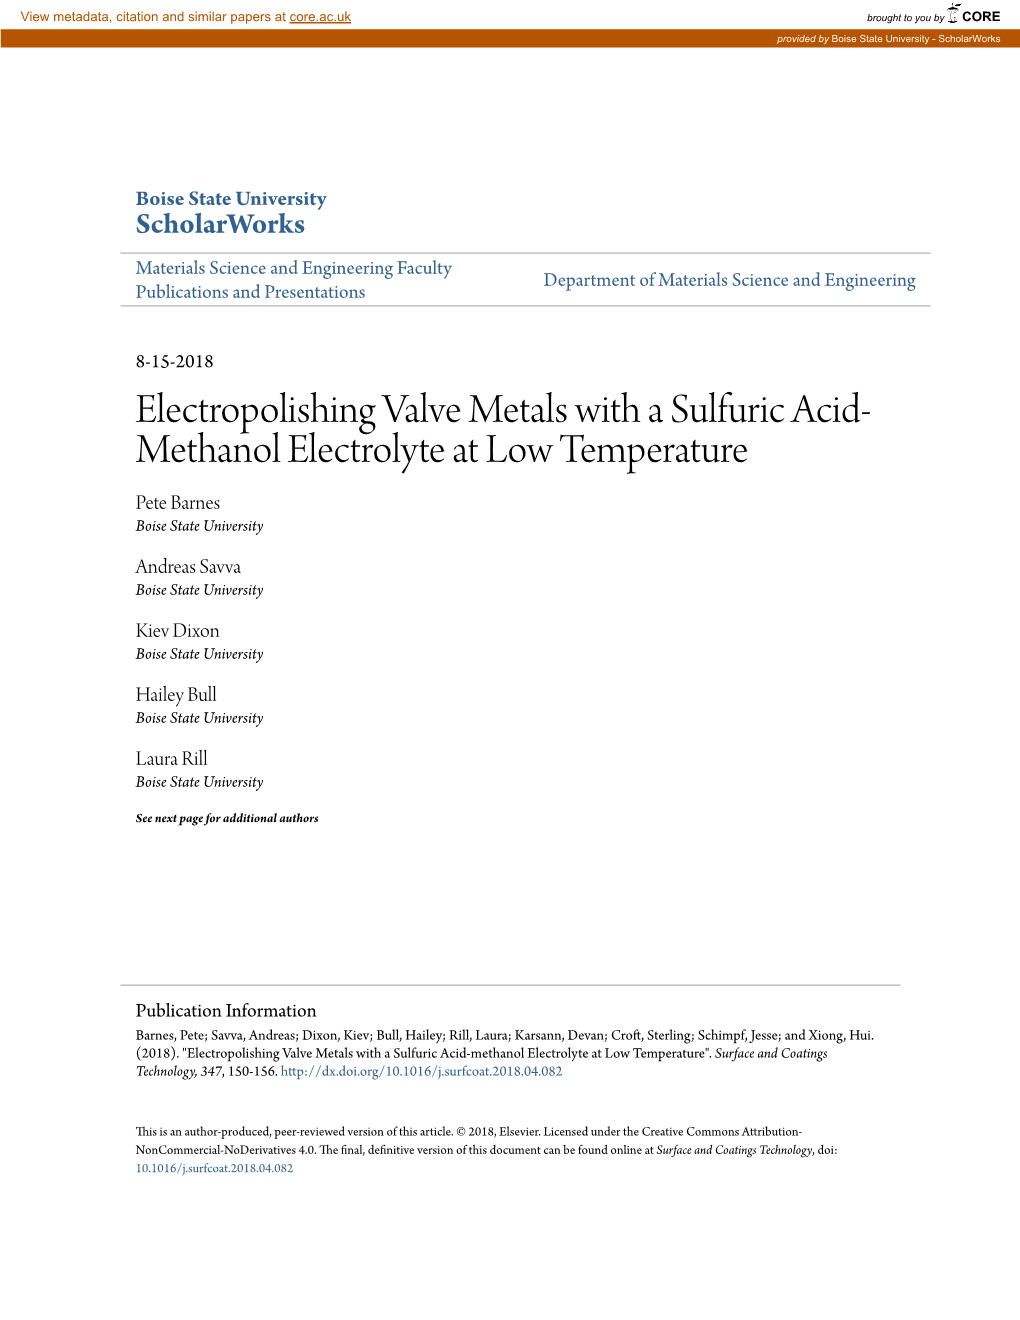 Electropolishing Valve Metals with a Sulfuric Acid-Methanol Electrolyte at Low Temperature"